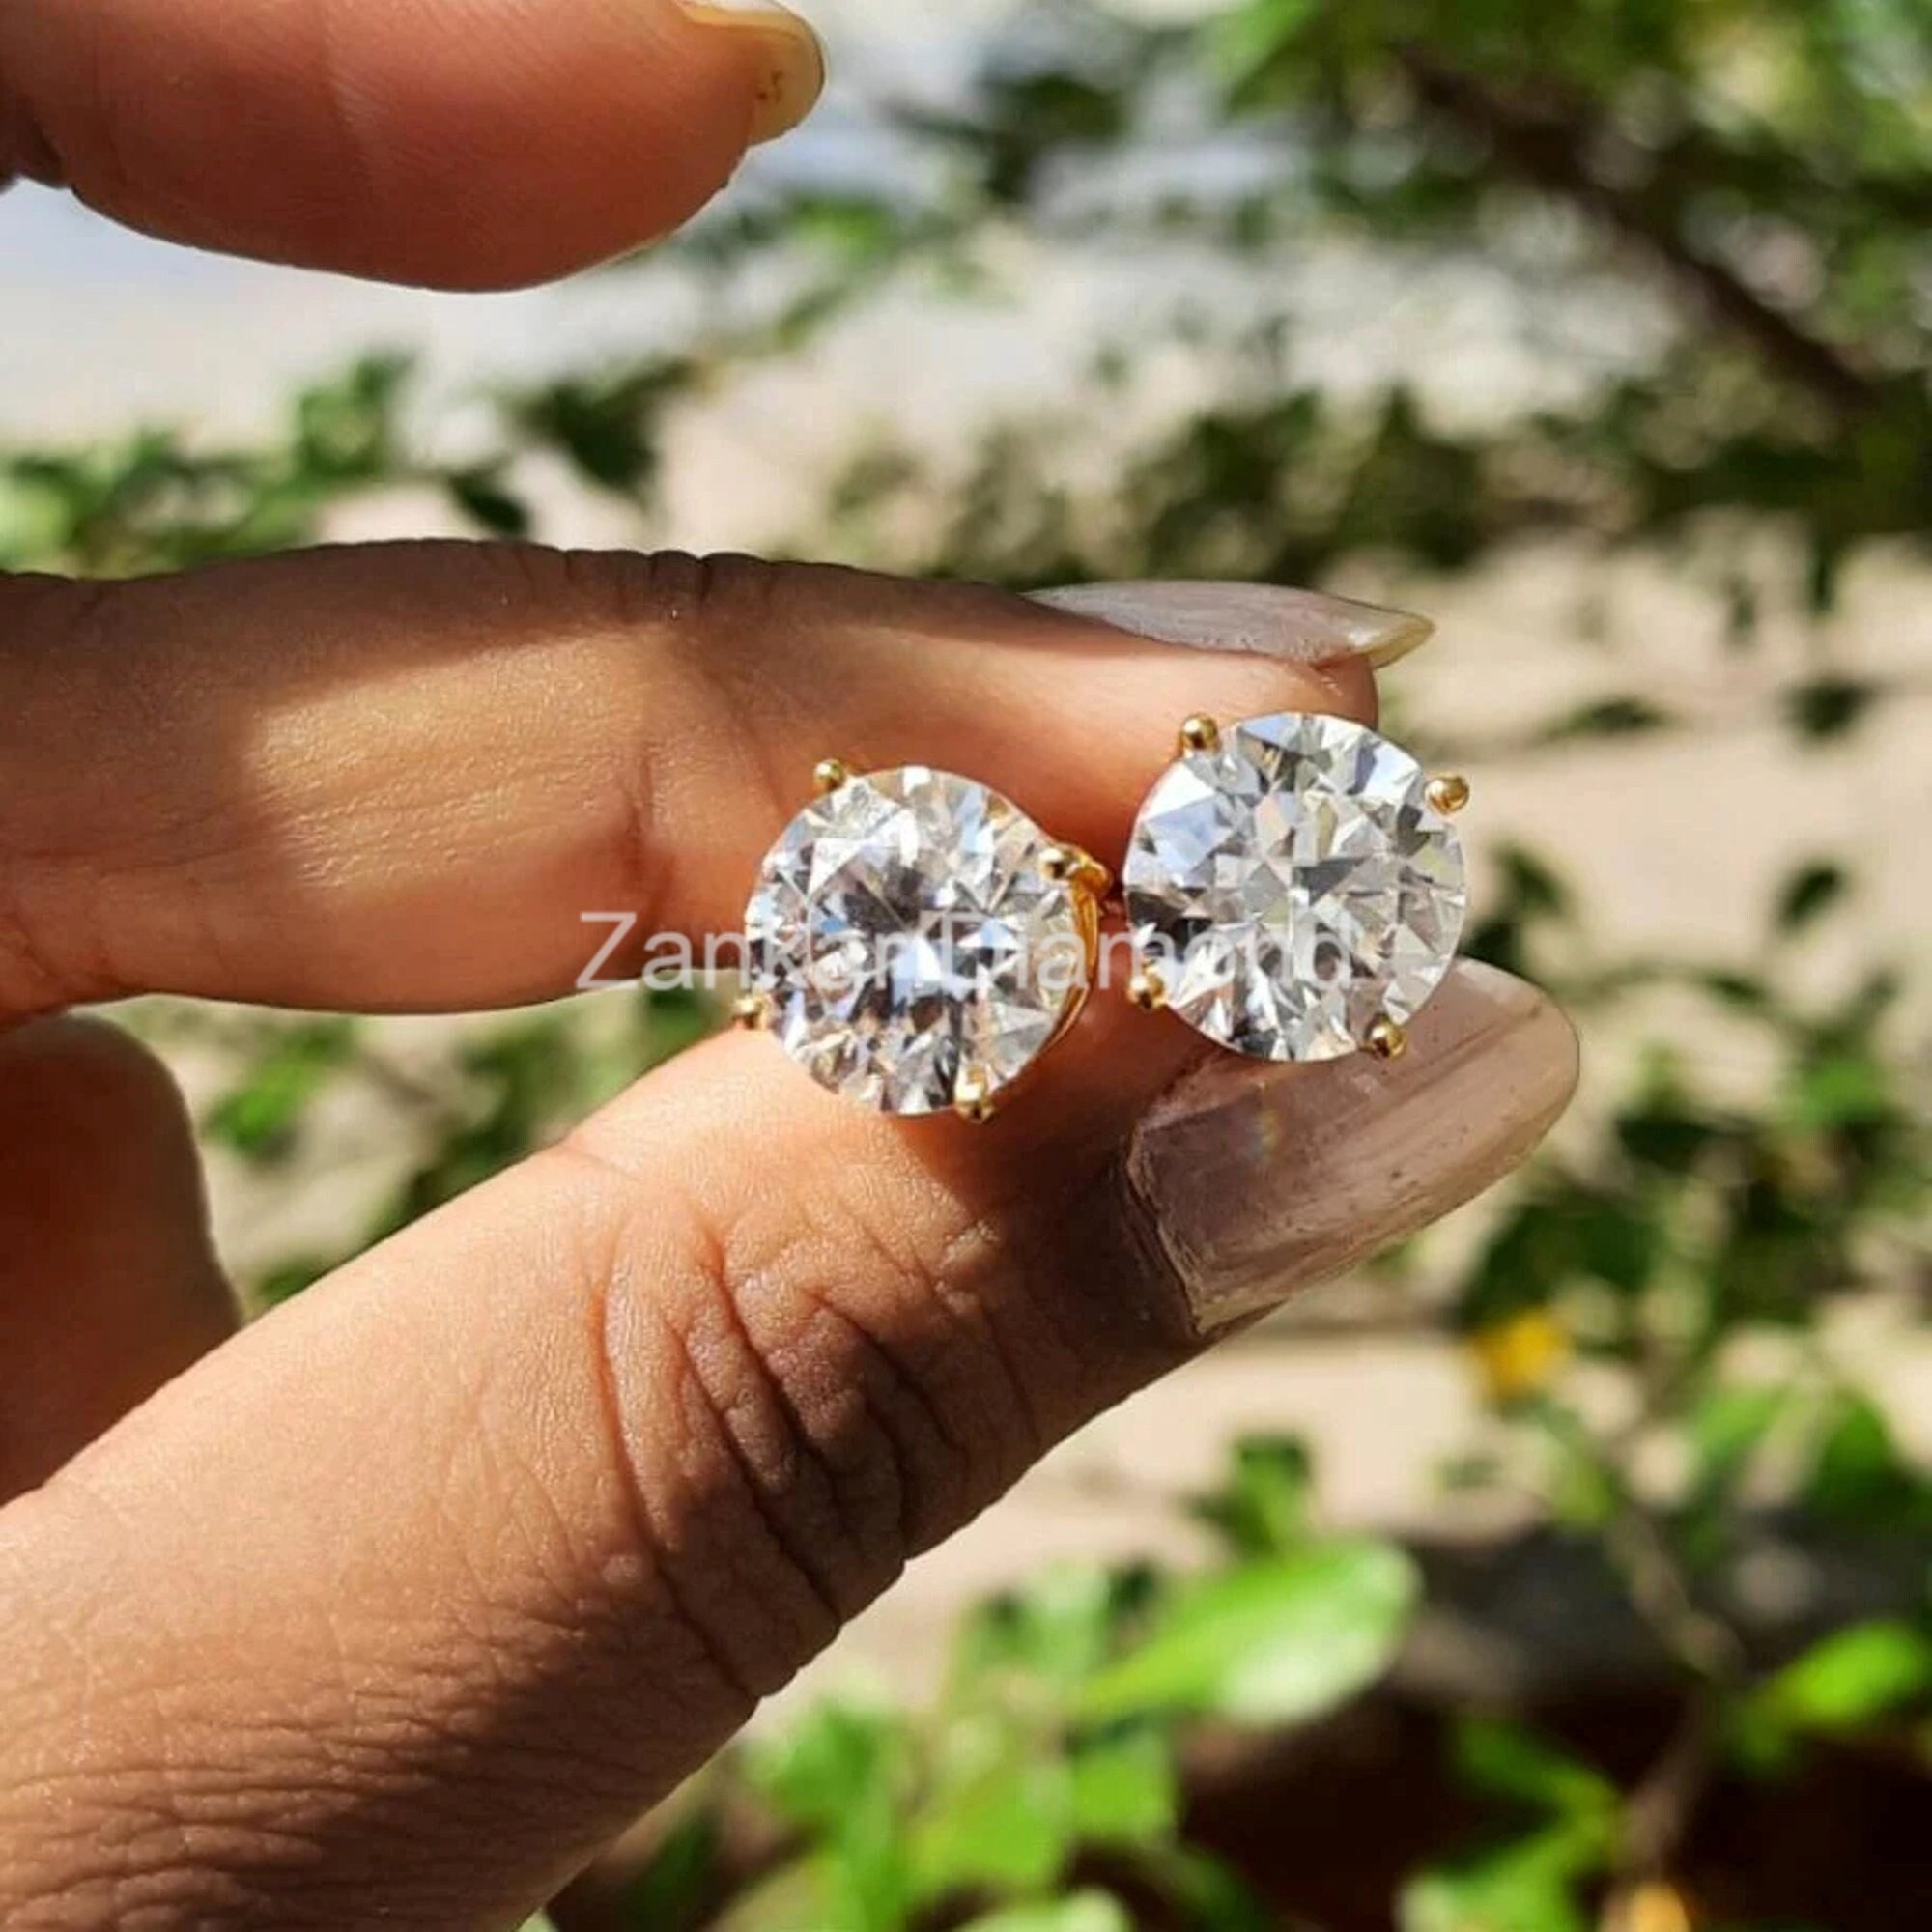 Round Moissanite Floral Halo Stud Earrings in 14K White Gold